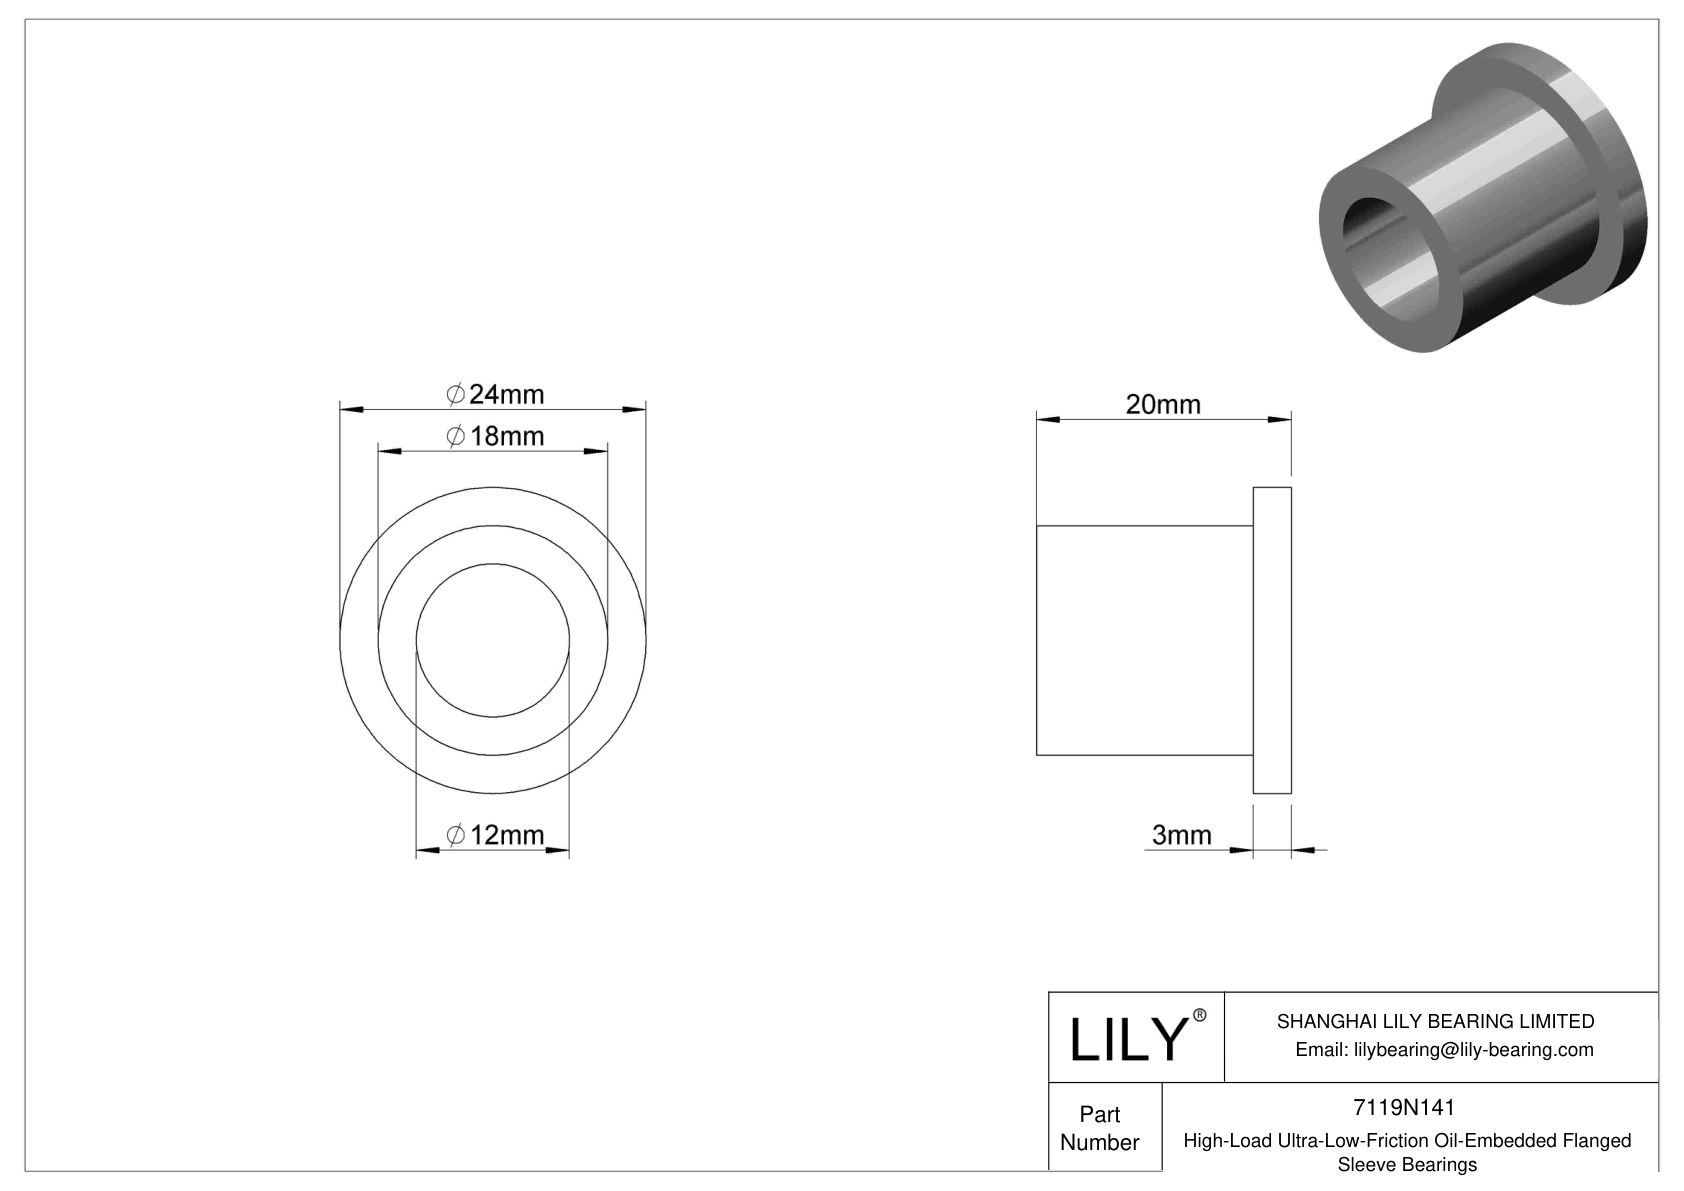 HBBJNBEB High-Load Ultra-Low-Friction Oil-Embedded Flanged Sleeve Bearings cad drawing